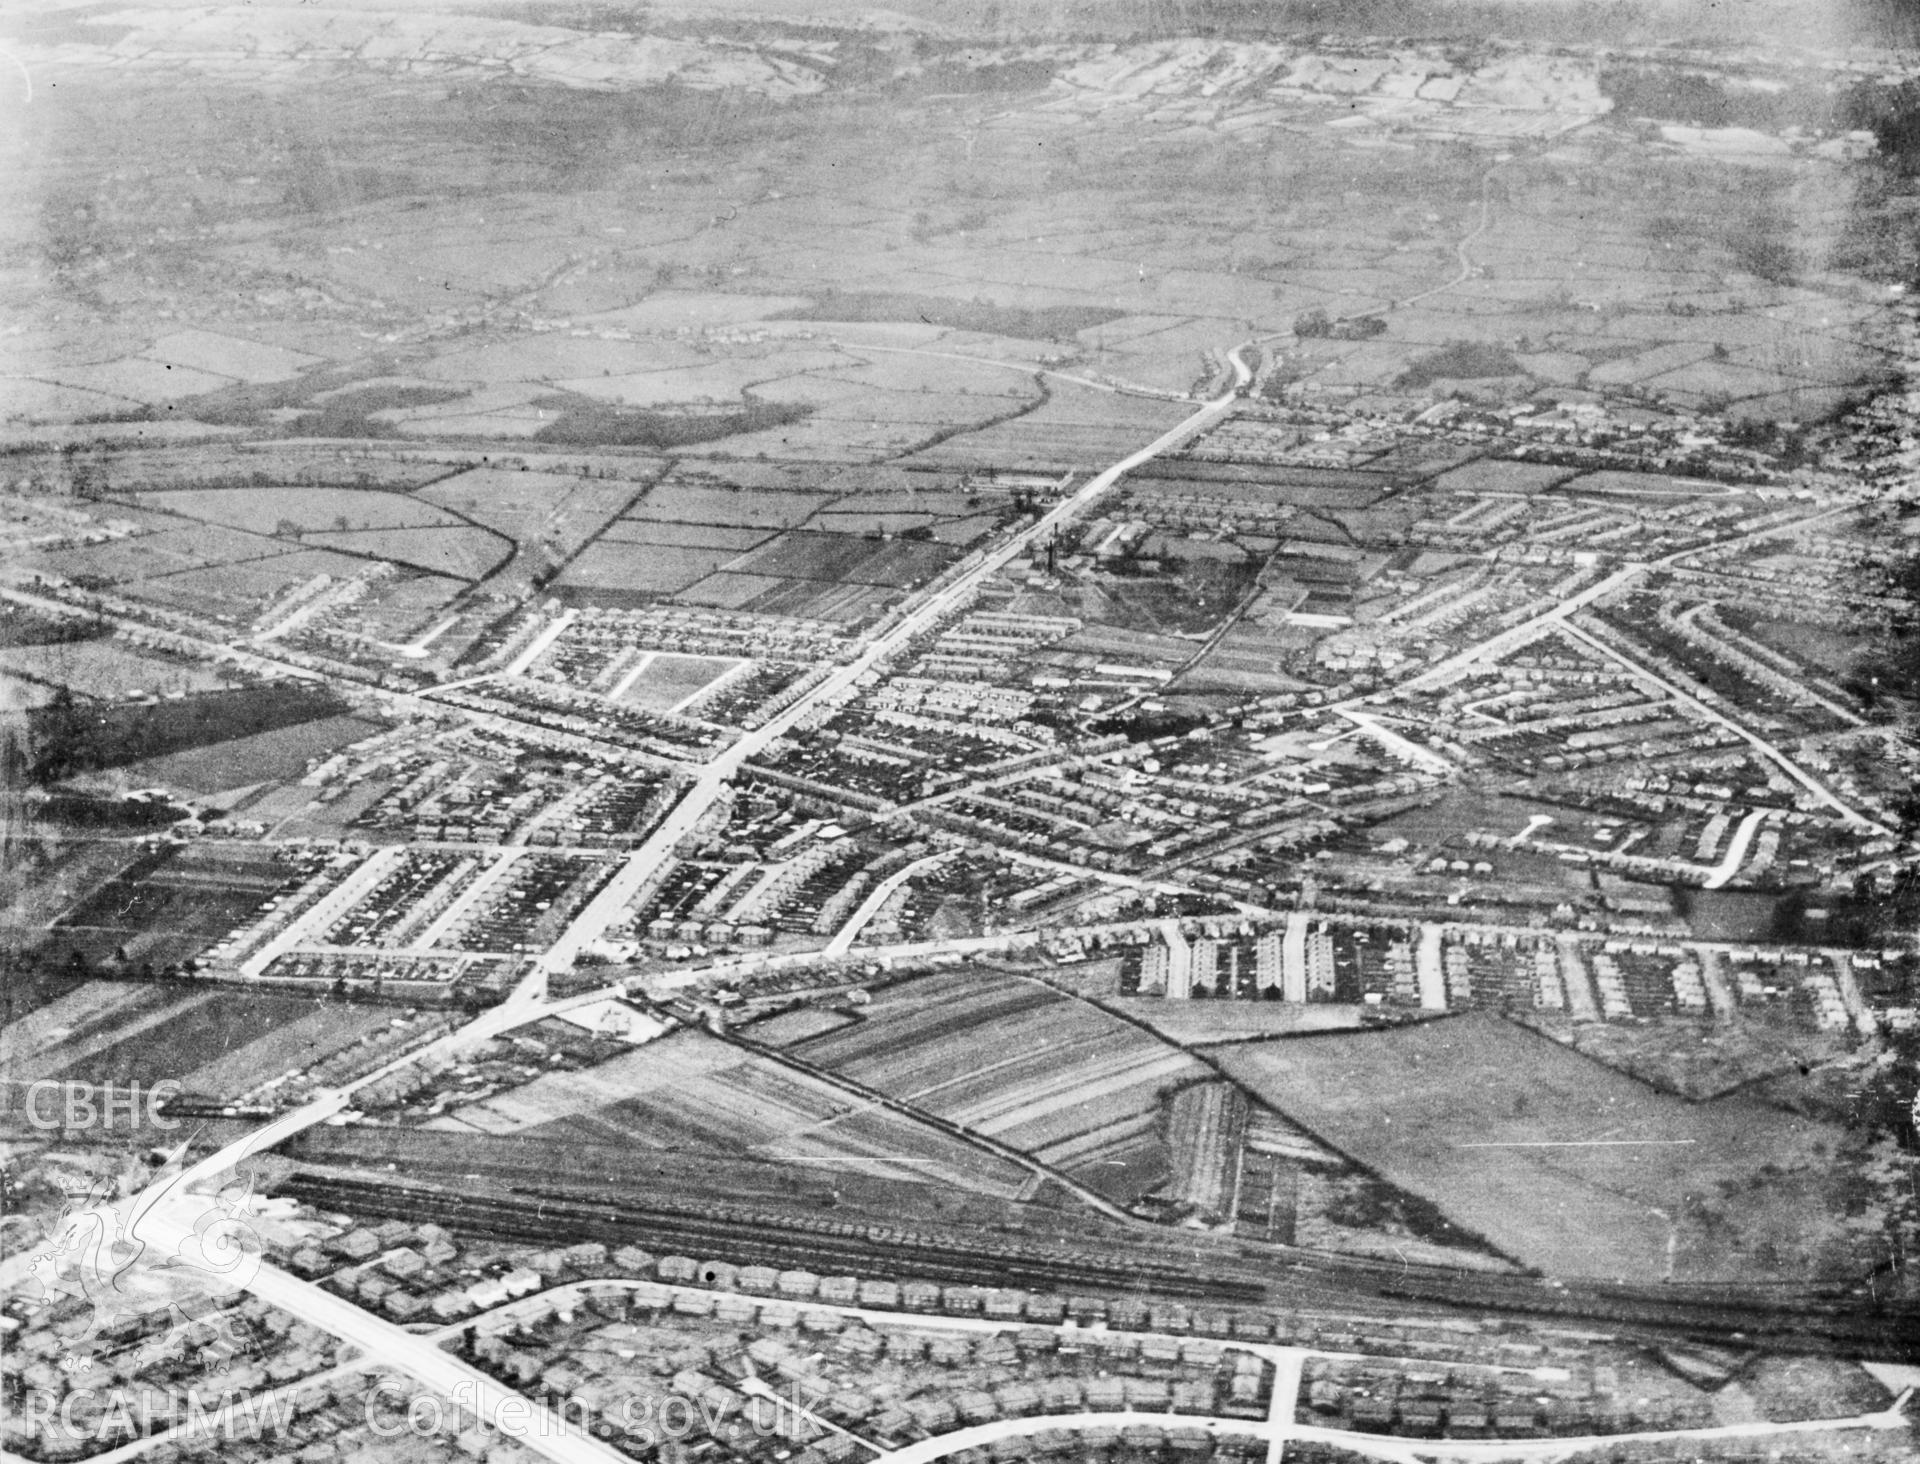 View believed to show the Whitchurch area of Cardiff. Oblique aerial photograph, 5?x4? BW glass plate.